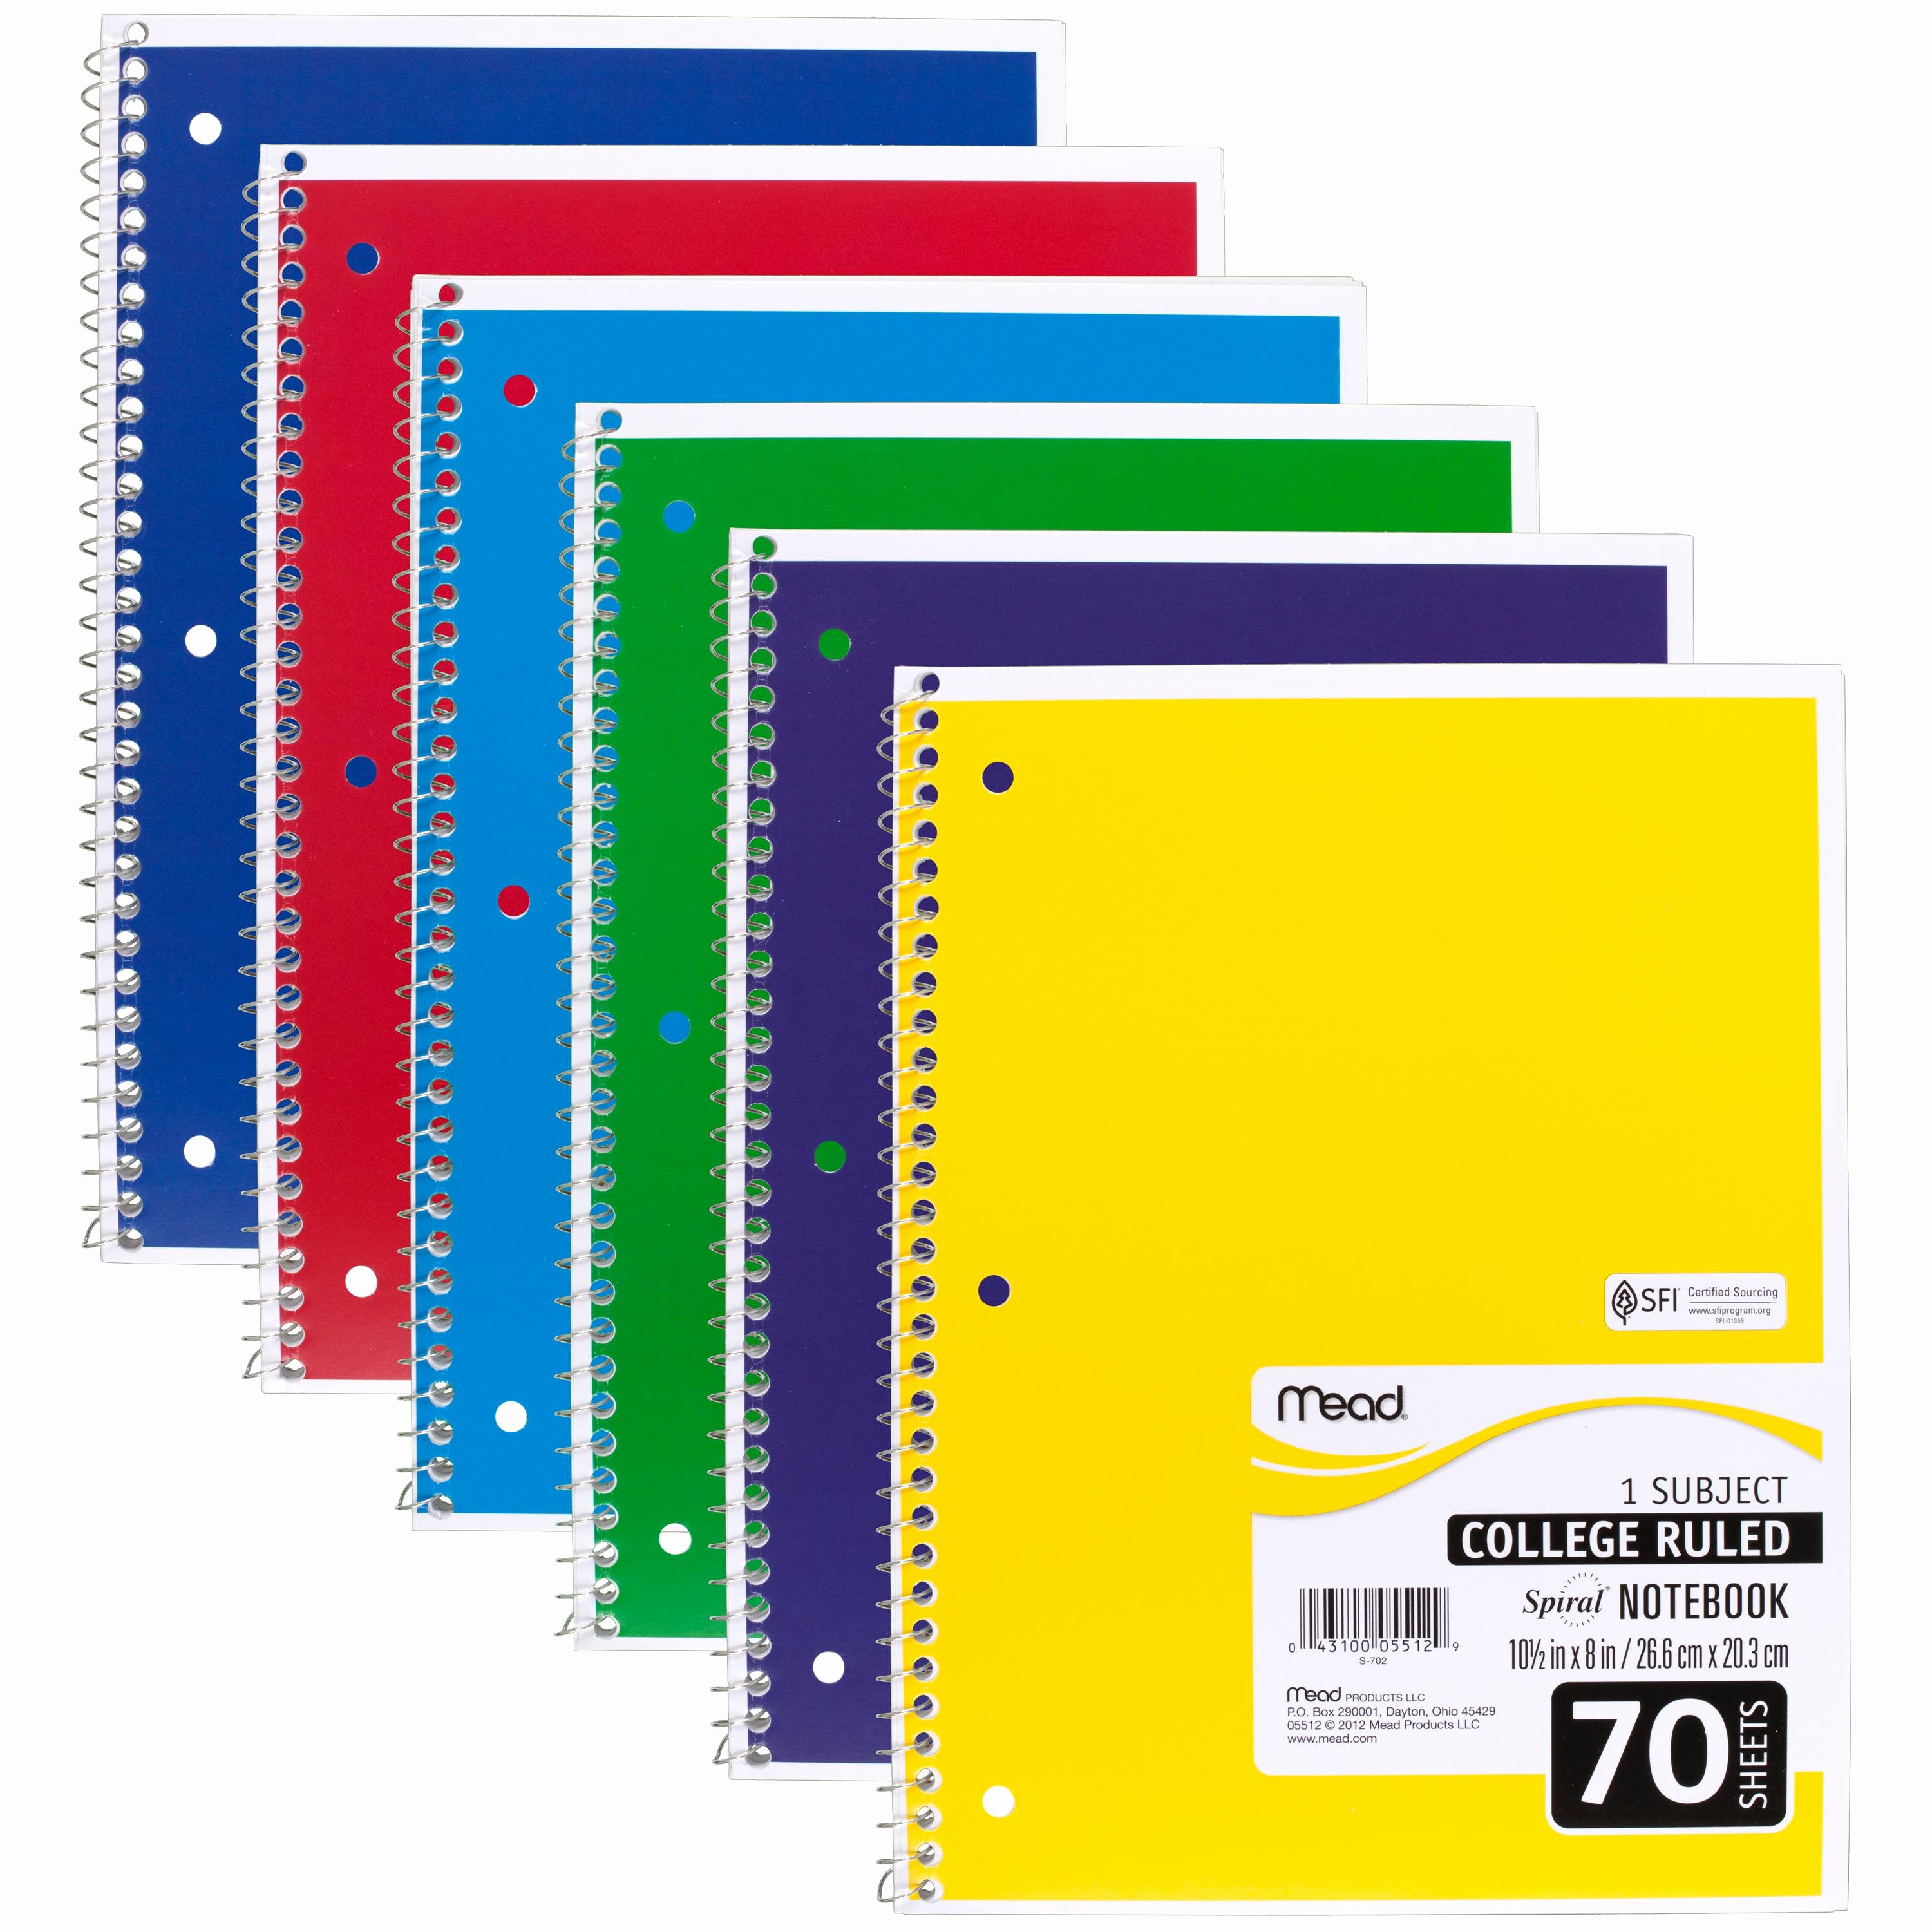 College Ruled Notebook Paper Fresh Amazon Mead Spiral Notebook College Ruled 1 Subject 70 Sheets 8 X 10 5 Inches assorted